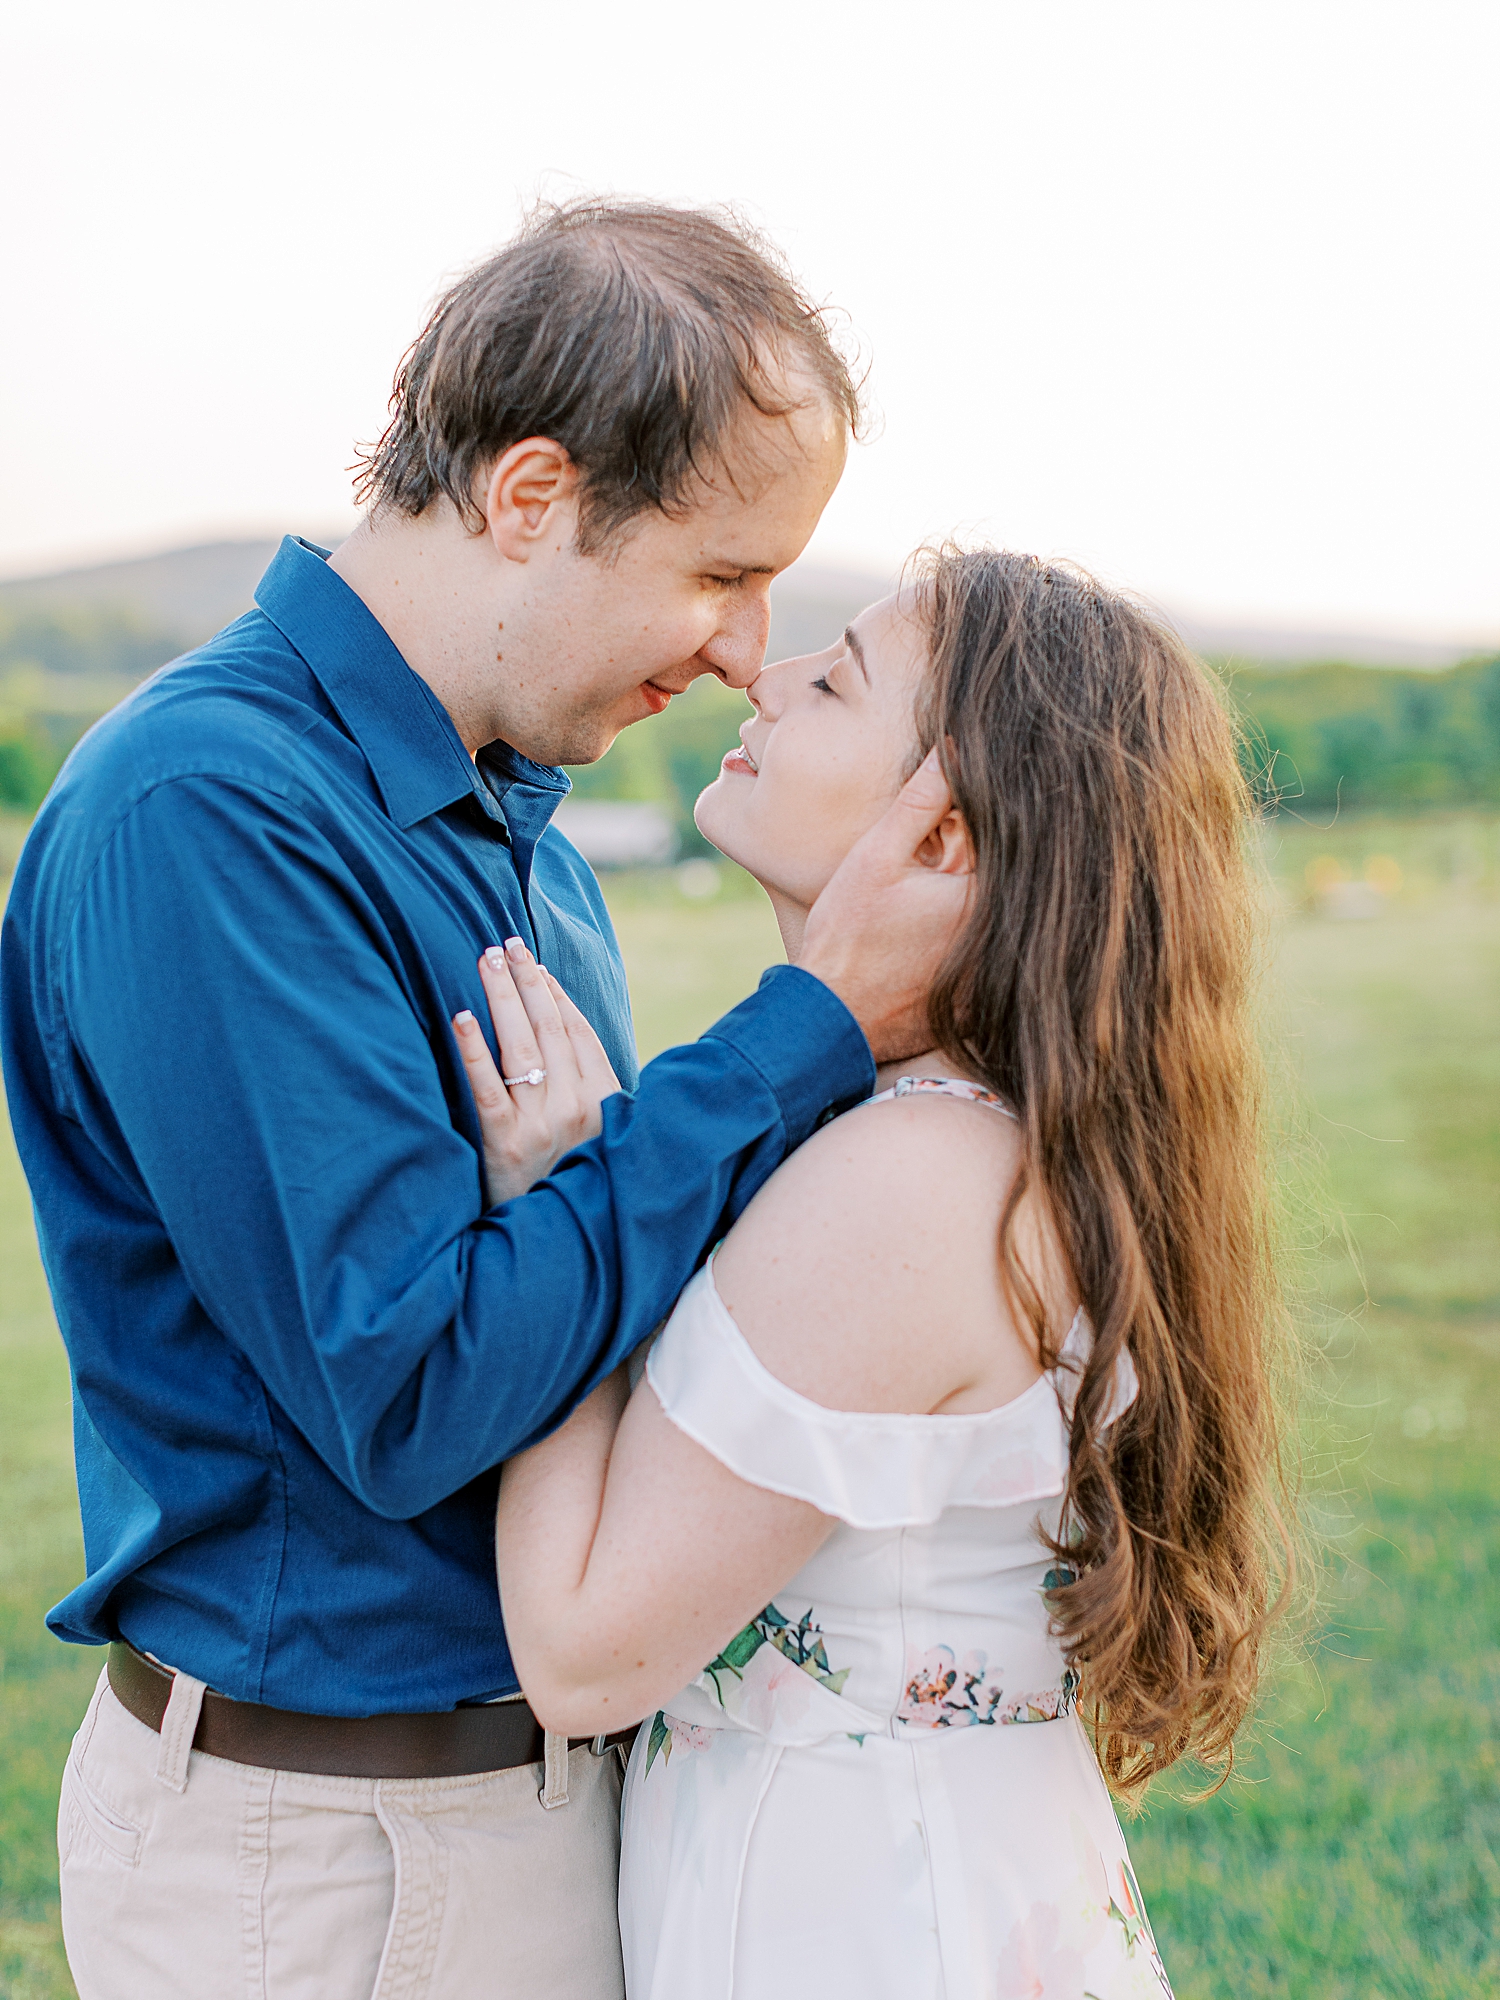 Engagement photos of couple taken near Charlottesville, Virginia in garden by Ashley Eagleson Photography.